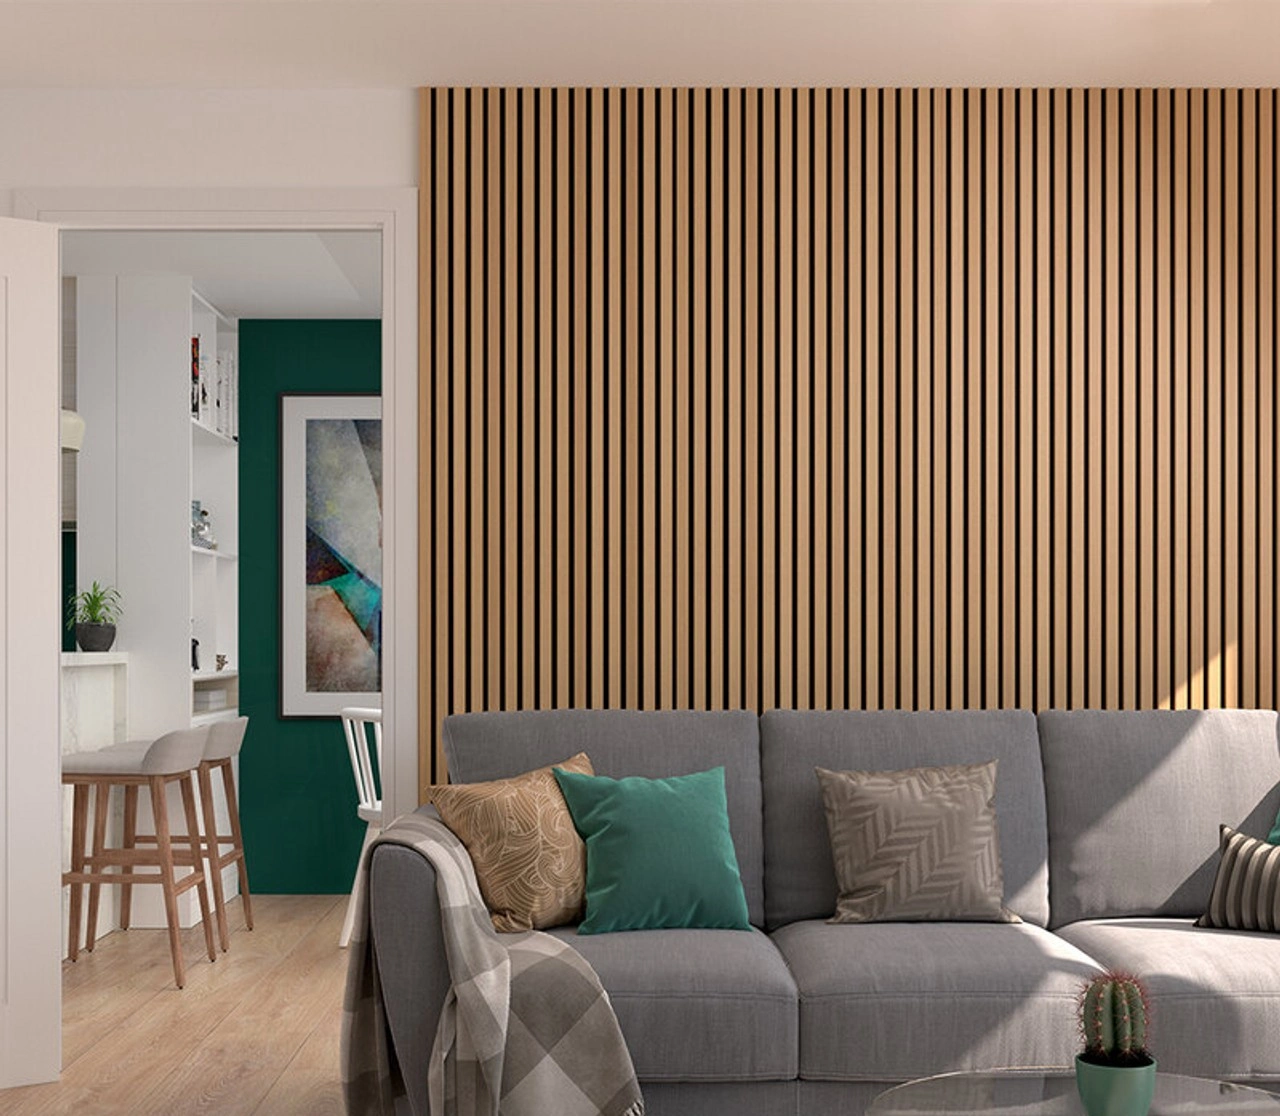 Slatted timber wall panelling used in a living room space. Deanta Howrth Timber light brown coloured wall panels.